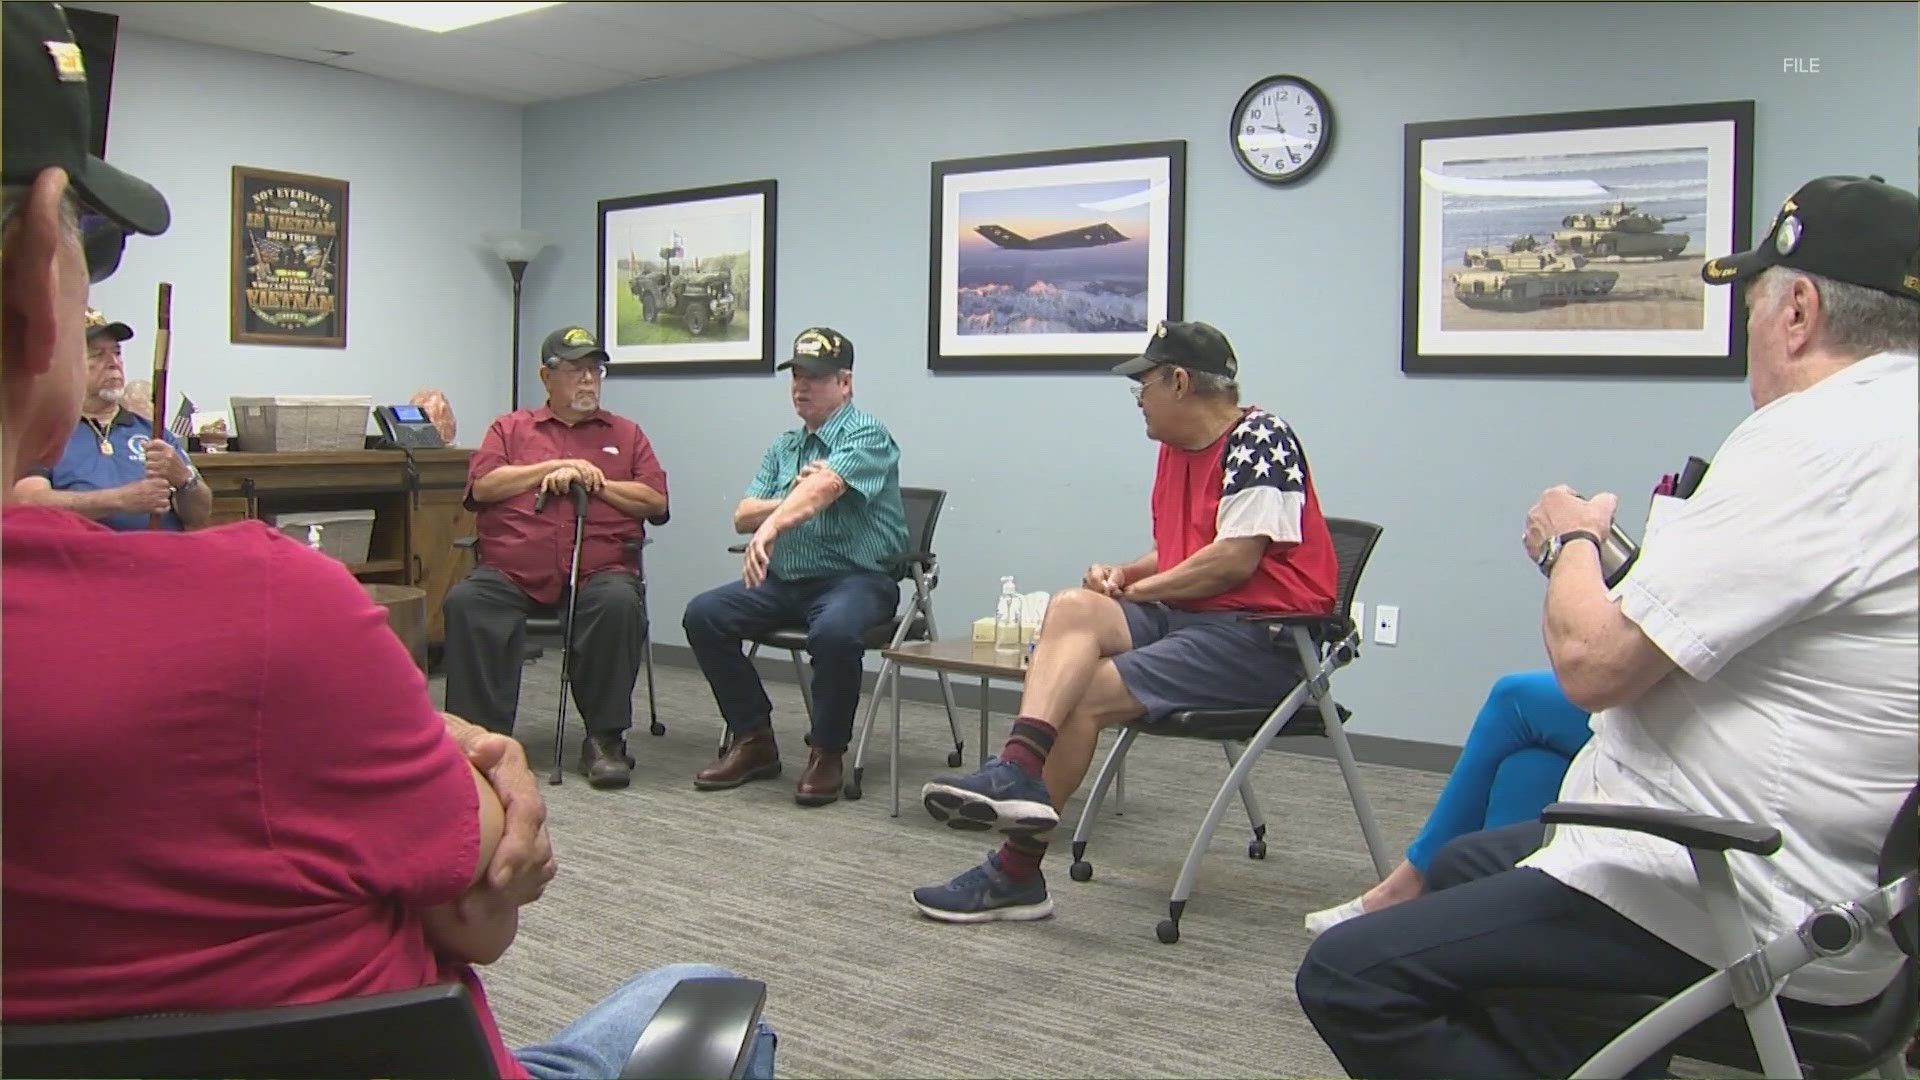 Health officials stress the importance of reaching out for help. KVUE's Dominique Newland has the details about local resources available for veterans.